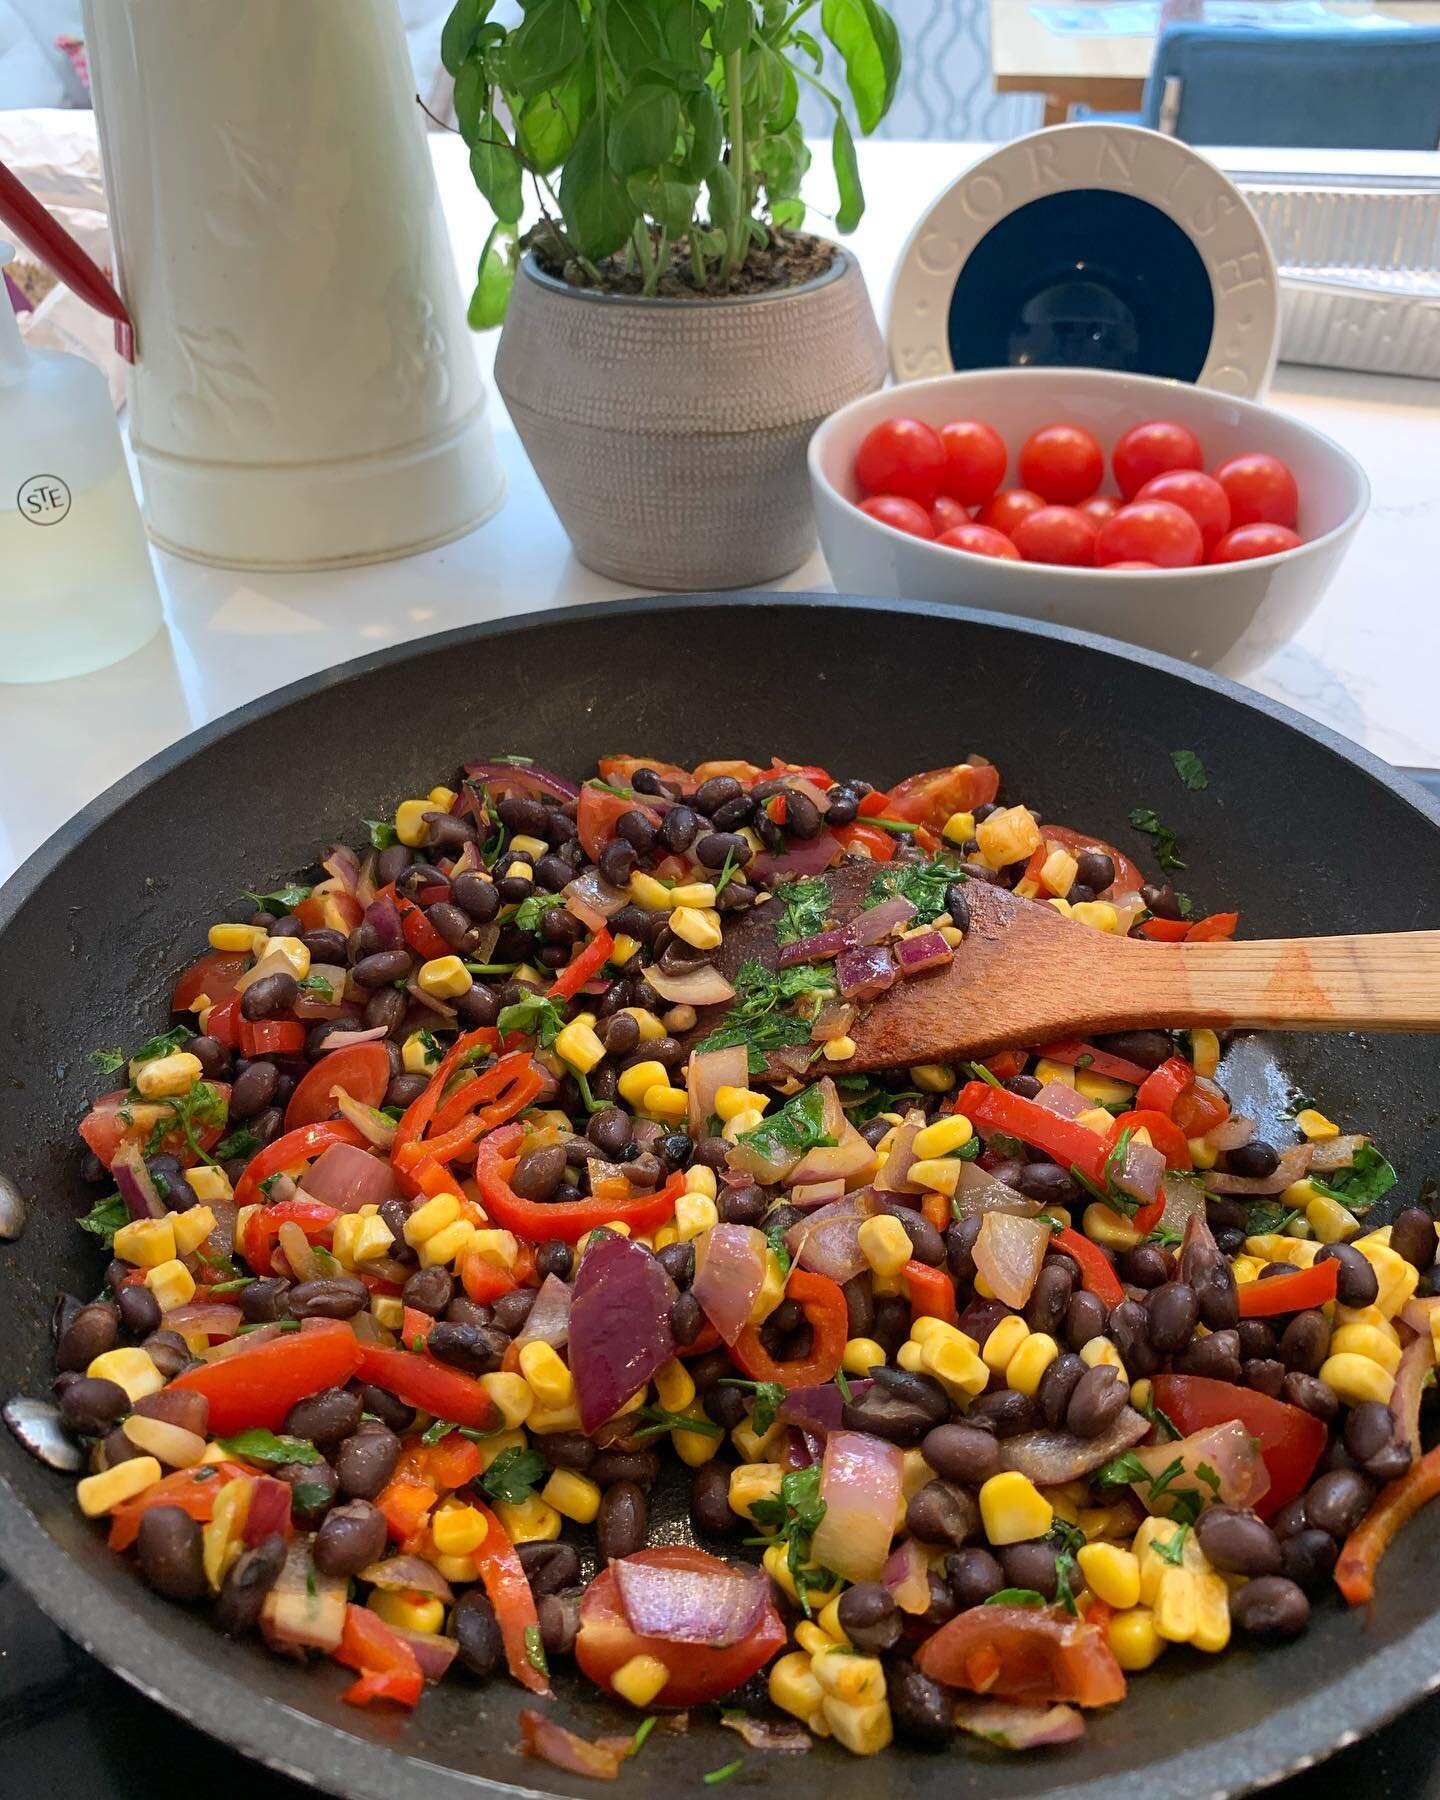 Just because... it looked super colourful 🌈 ! 

Making a fajita mix with red onions, peppers, tomatoes, corn and black beans. Chicken being added in a minute! 

#midweekmeals #healthymidweekmeals #eattherainbow #nourish